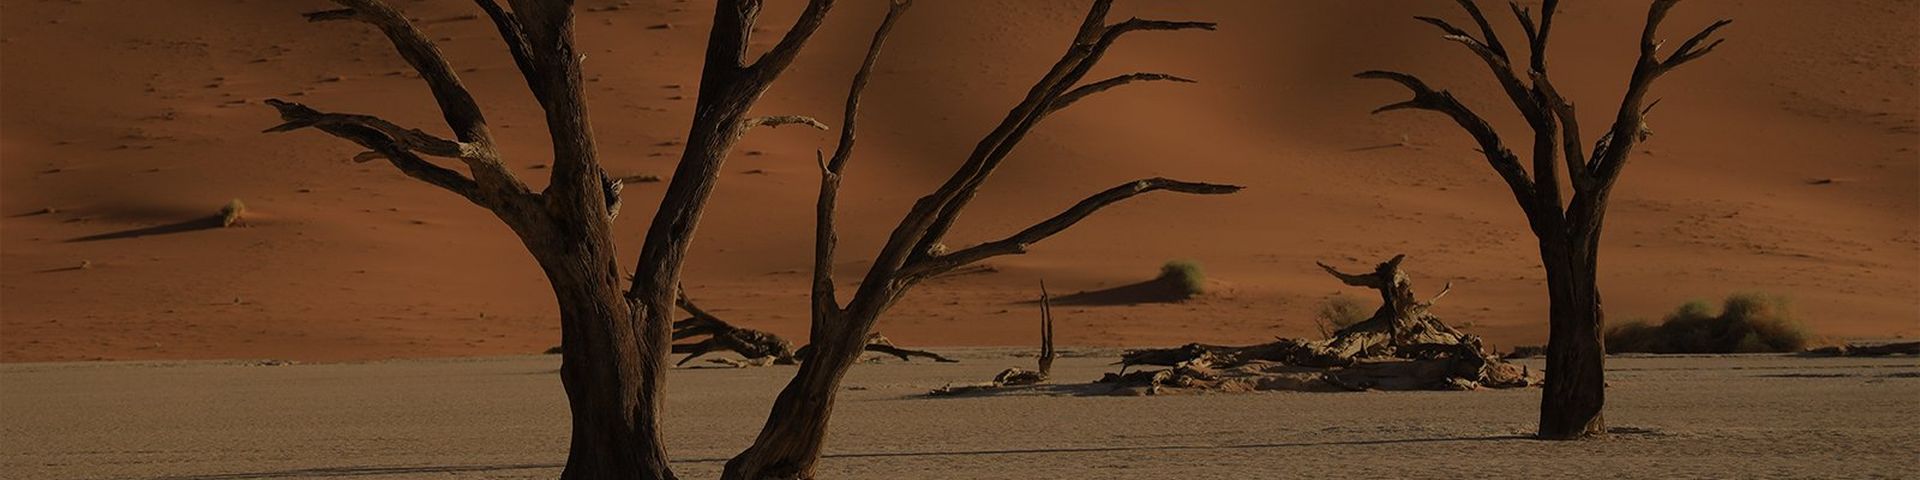 Beautiful image of trees on sand dunes at sunset taken on Canon EOS-R